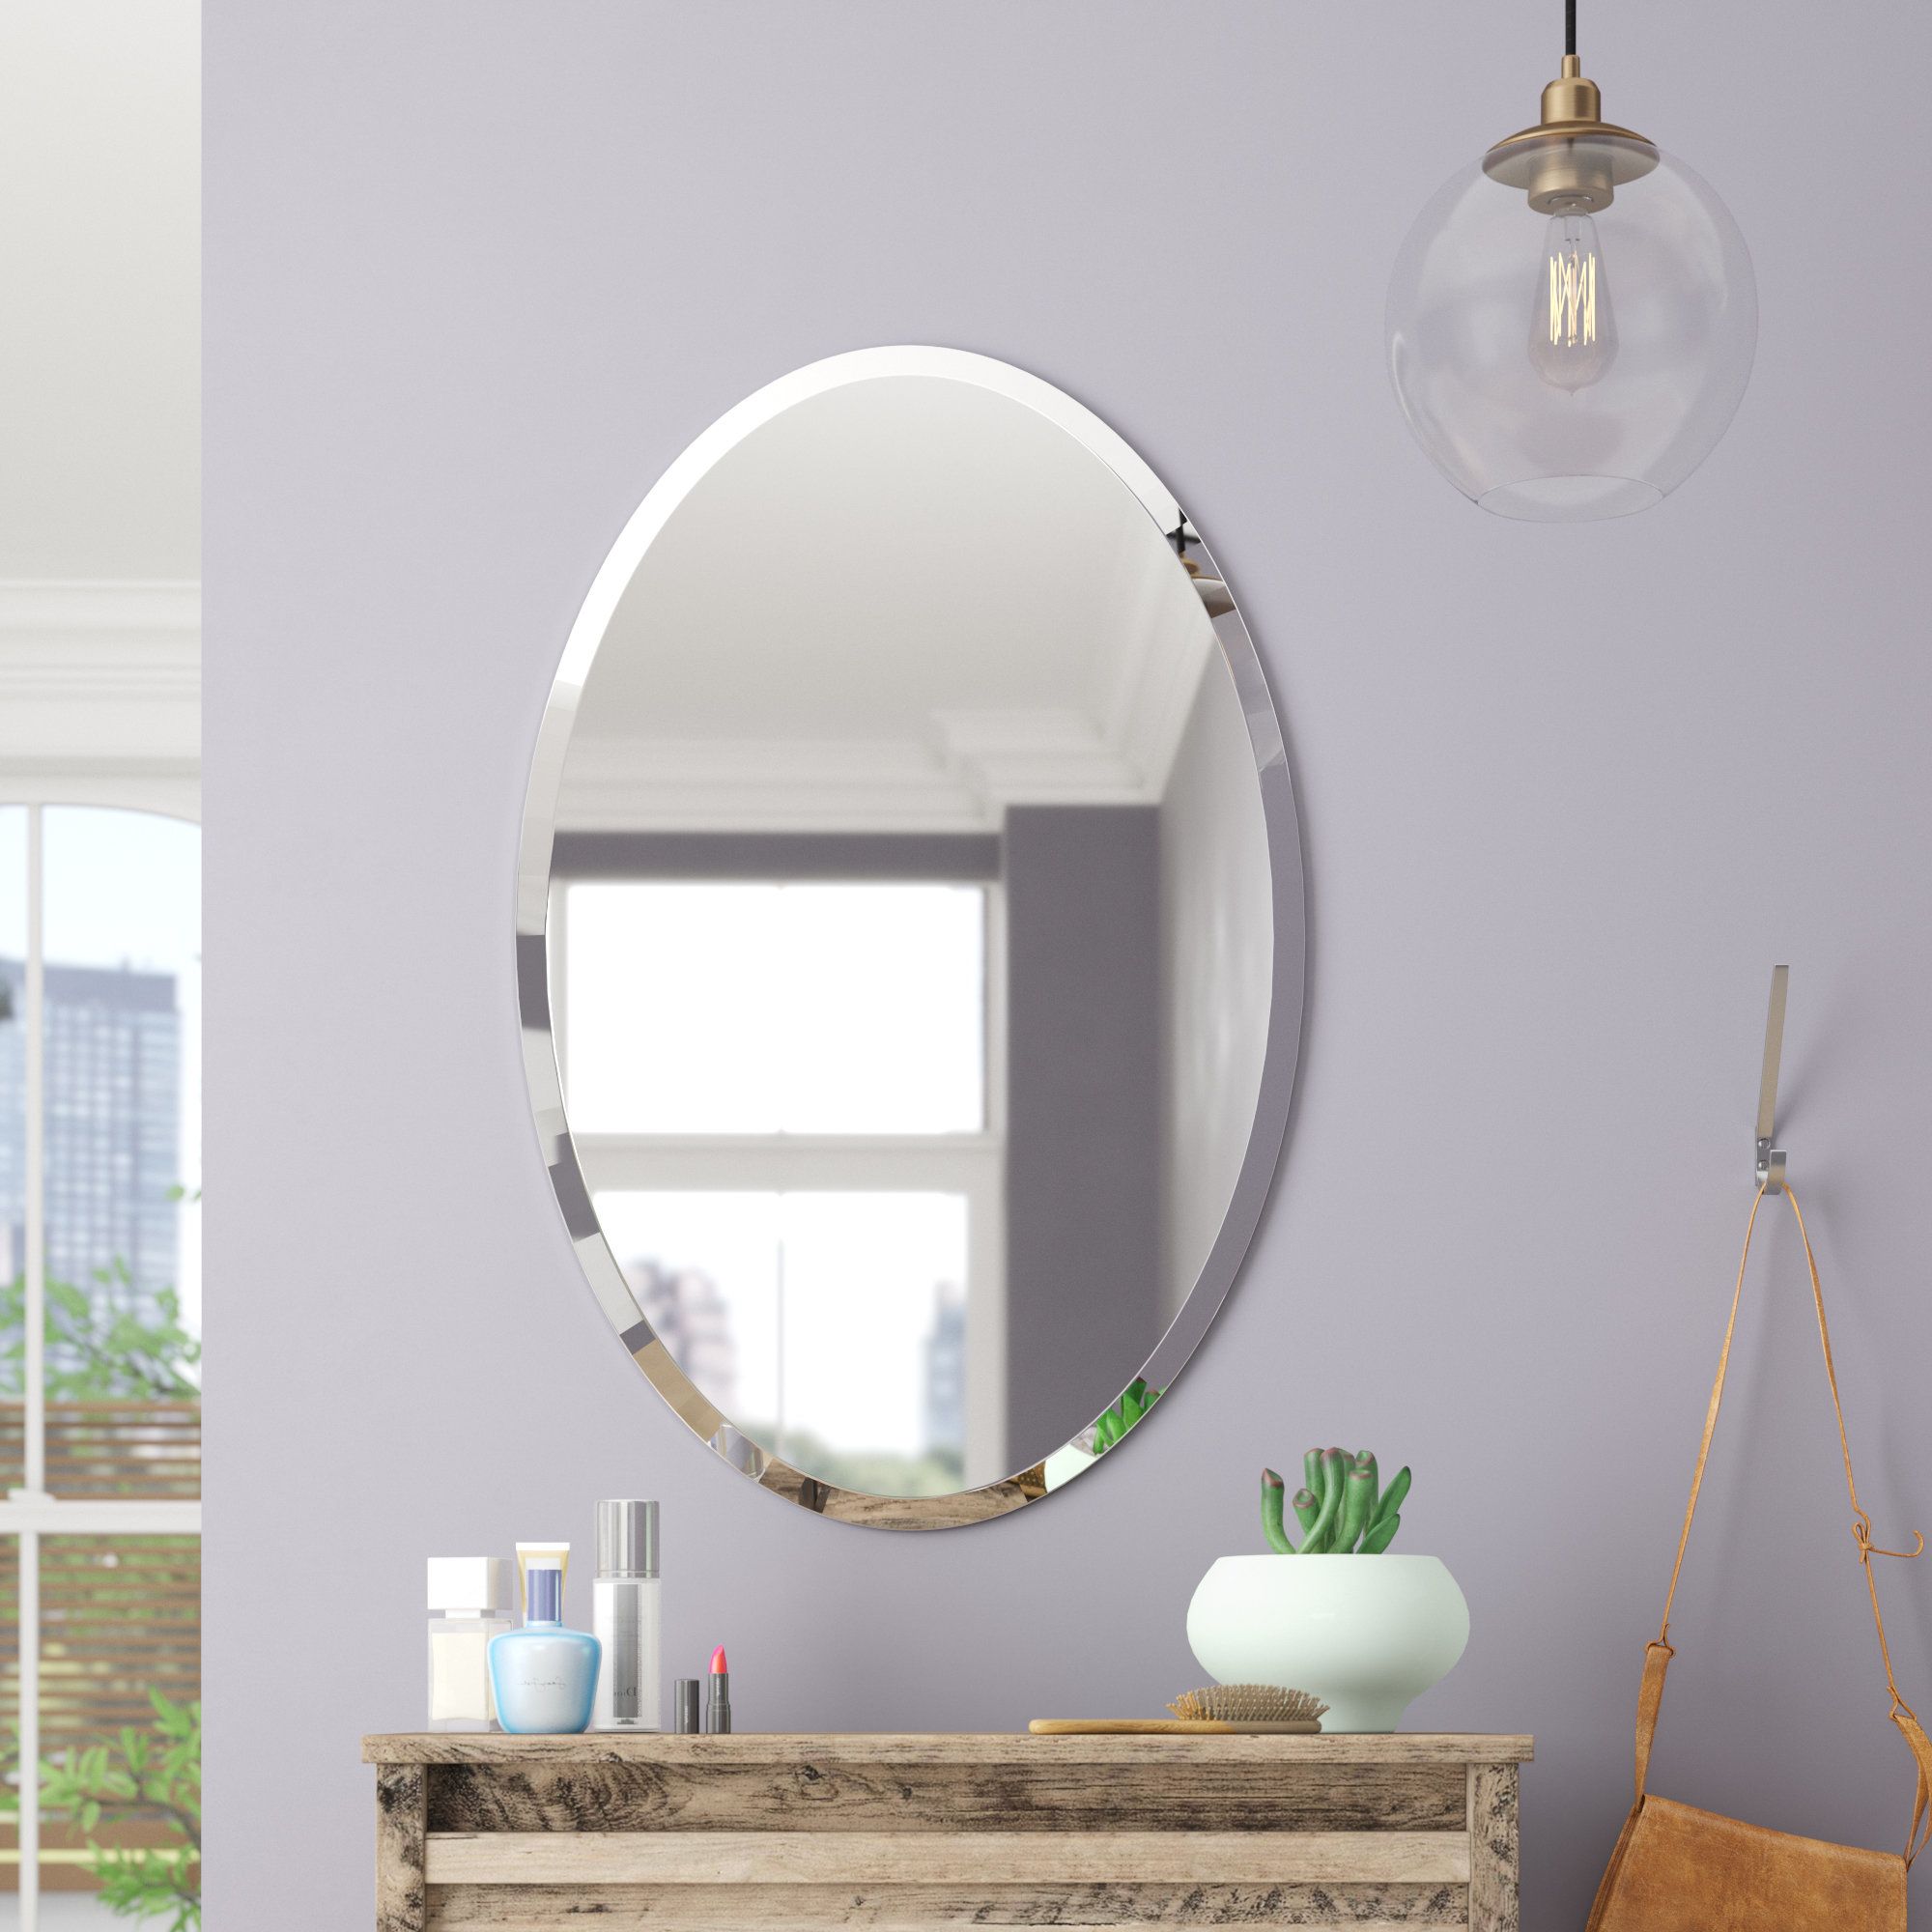 Widely Used Oval Bathroom Wall Mirrors Inside Thornbury Oval Bevel Frameless Wall Mirror (View 10 of 20)